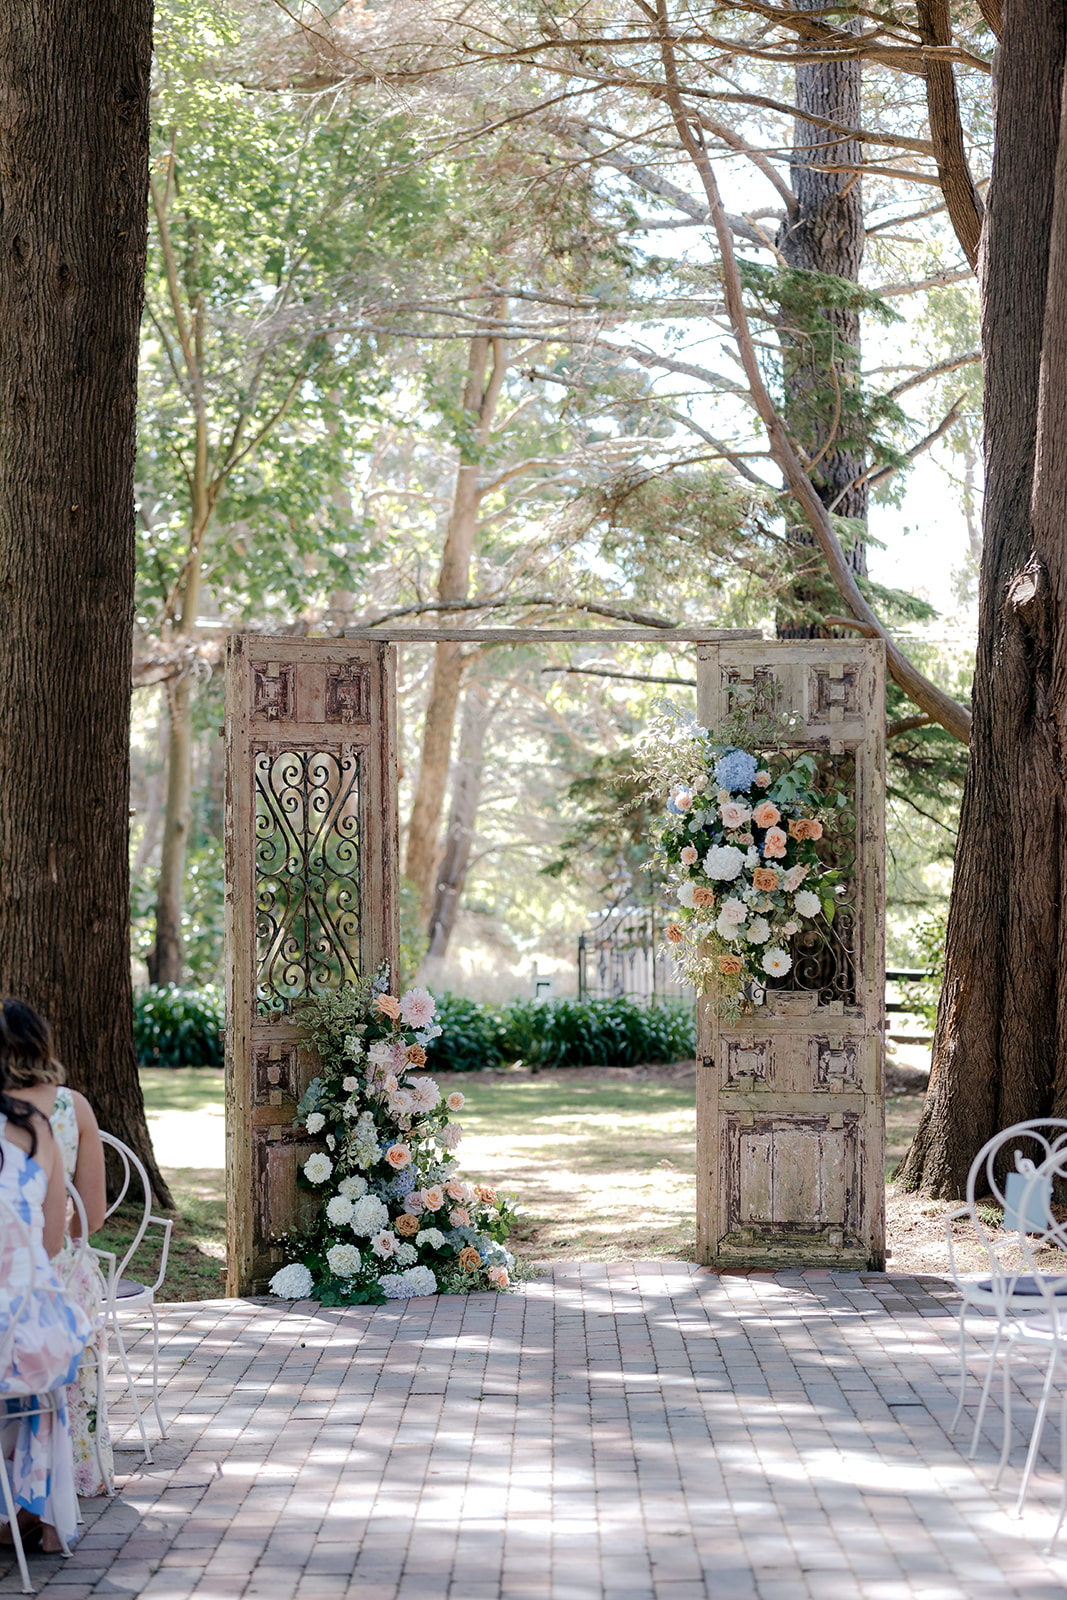 Ceremony floral arbour for an elegant country wedding.